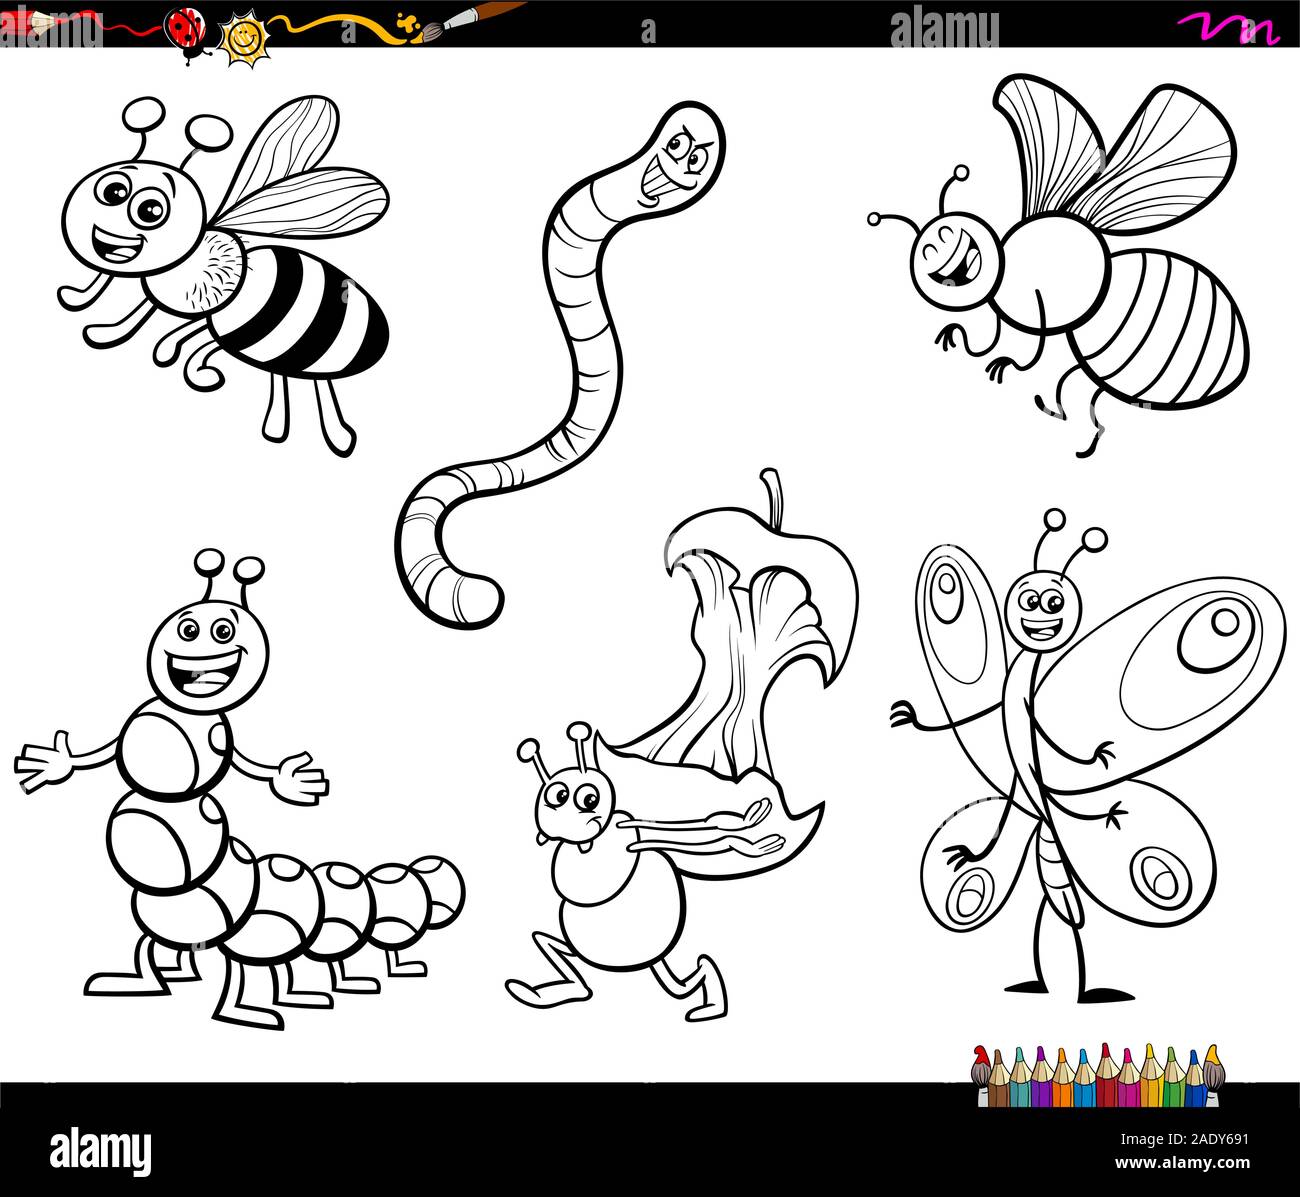 Black and White Cartoon Illustration of Funny Insects Animal Characters Set Coloring Book Page Stock Vector